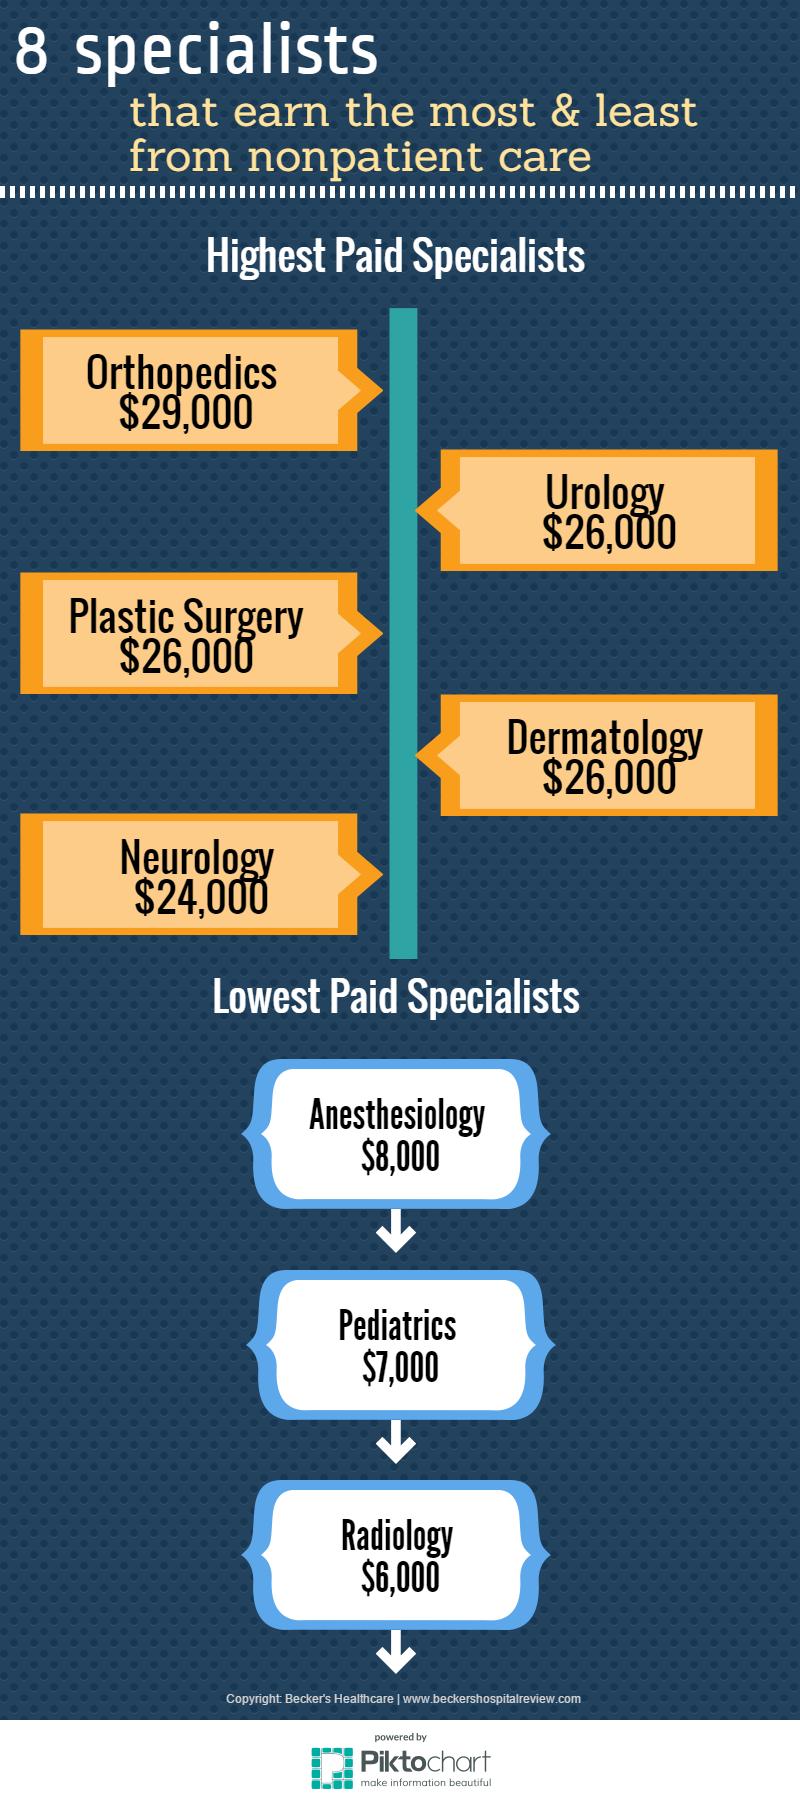 Specialists - earning most & least for nonpatient care